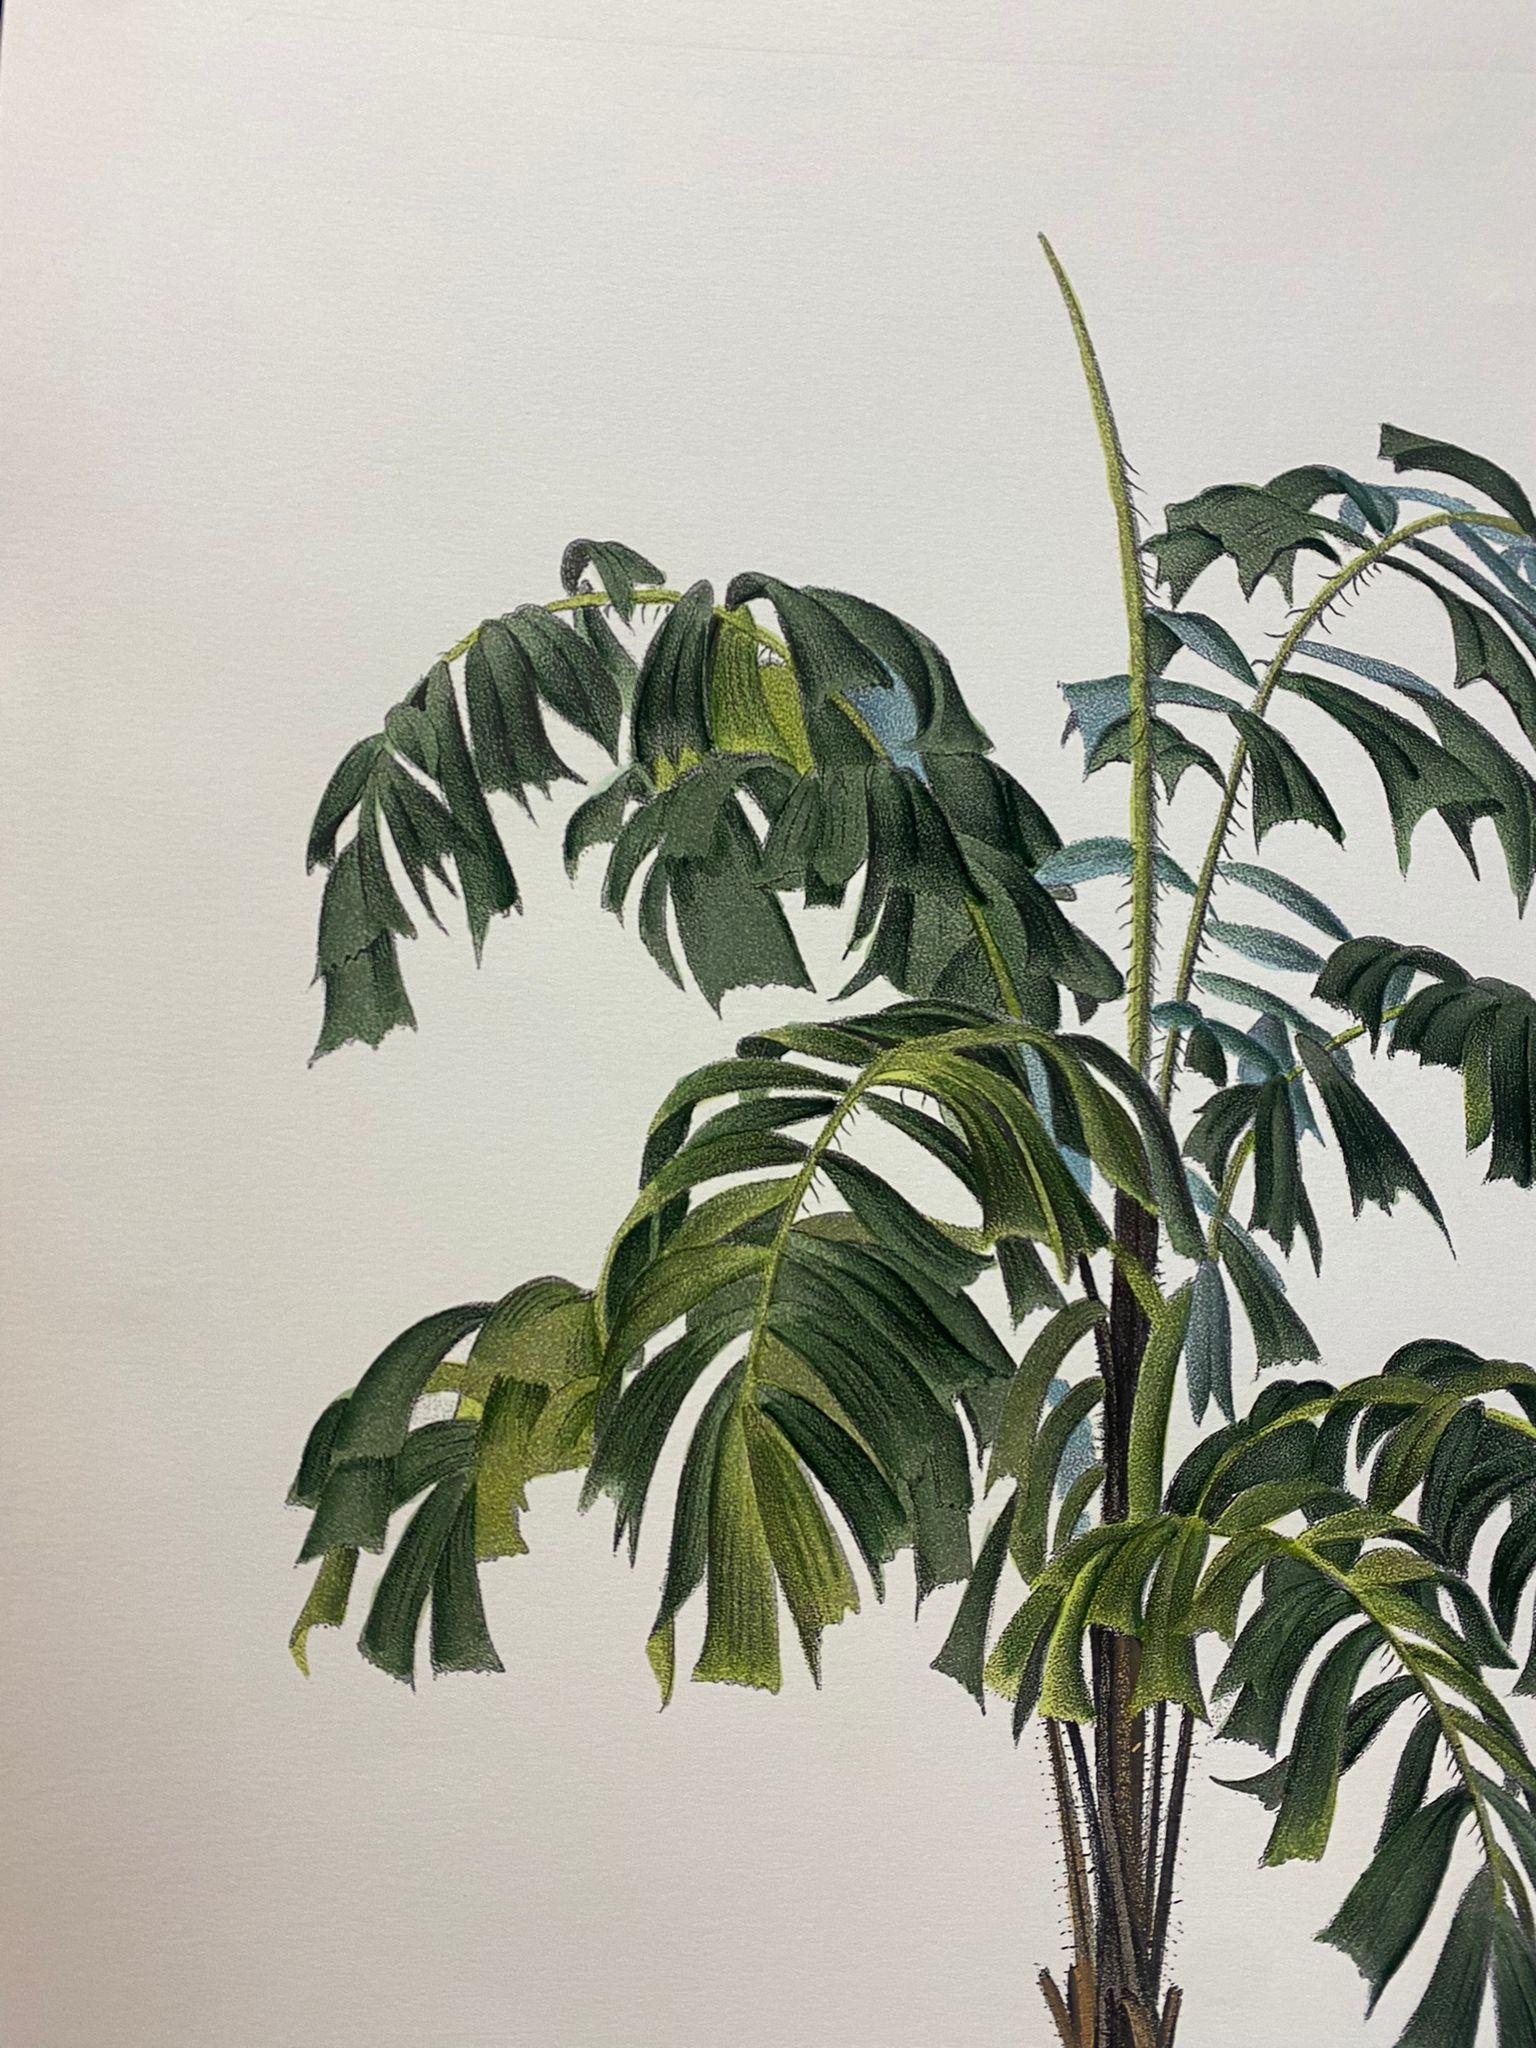 Elegant hand-watercoloured print representing Martinezia Lindeniana, of the palms family.

This botanical style print is available in 2 different natural representations to create a bright and joyful composition:
- Martinezia Lindeniana
- Caryota